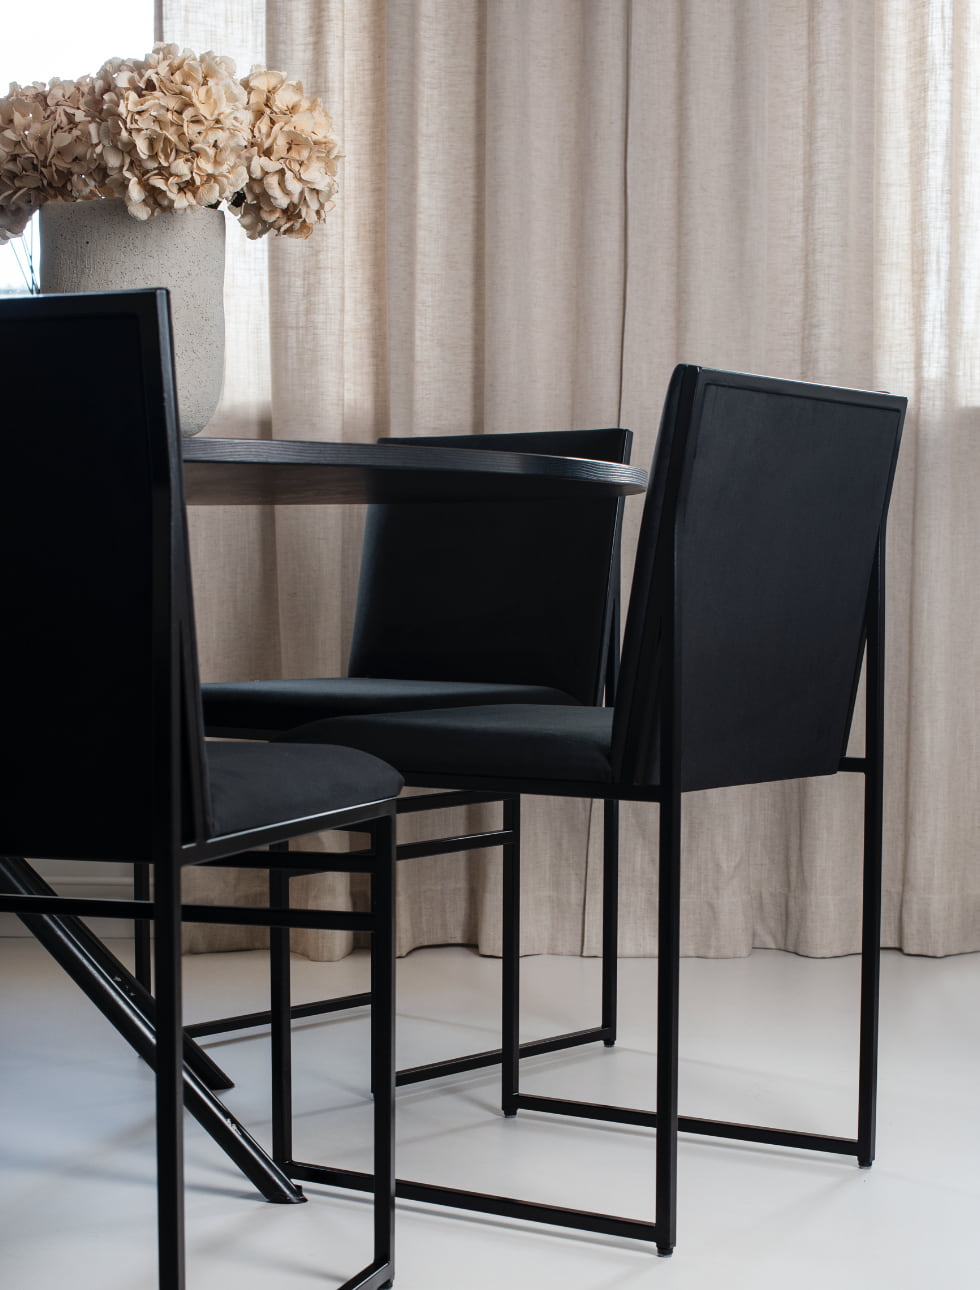 Isabell by Crea® dining chair - matstol